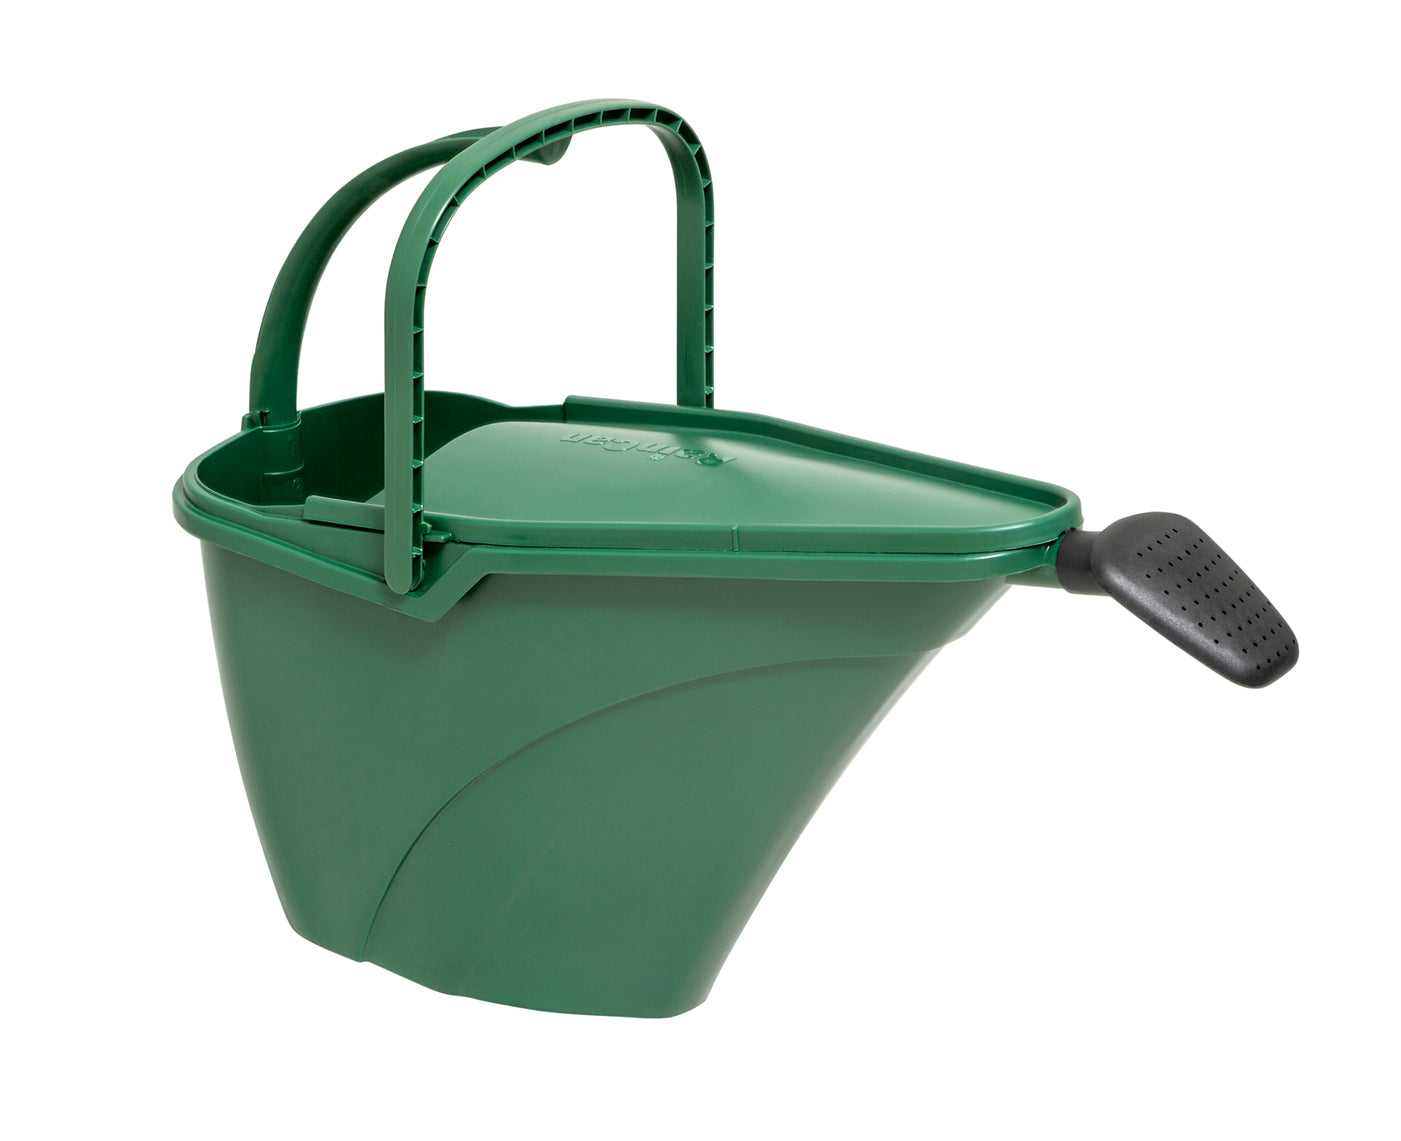 Etree Eco Rain Collecting Watering Can (7L) - Includes frog ladder to help wildlife escape-1